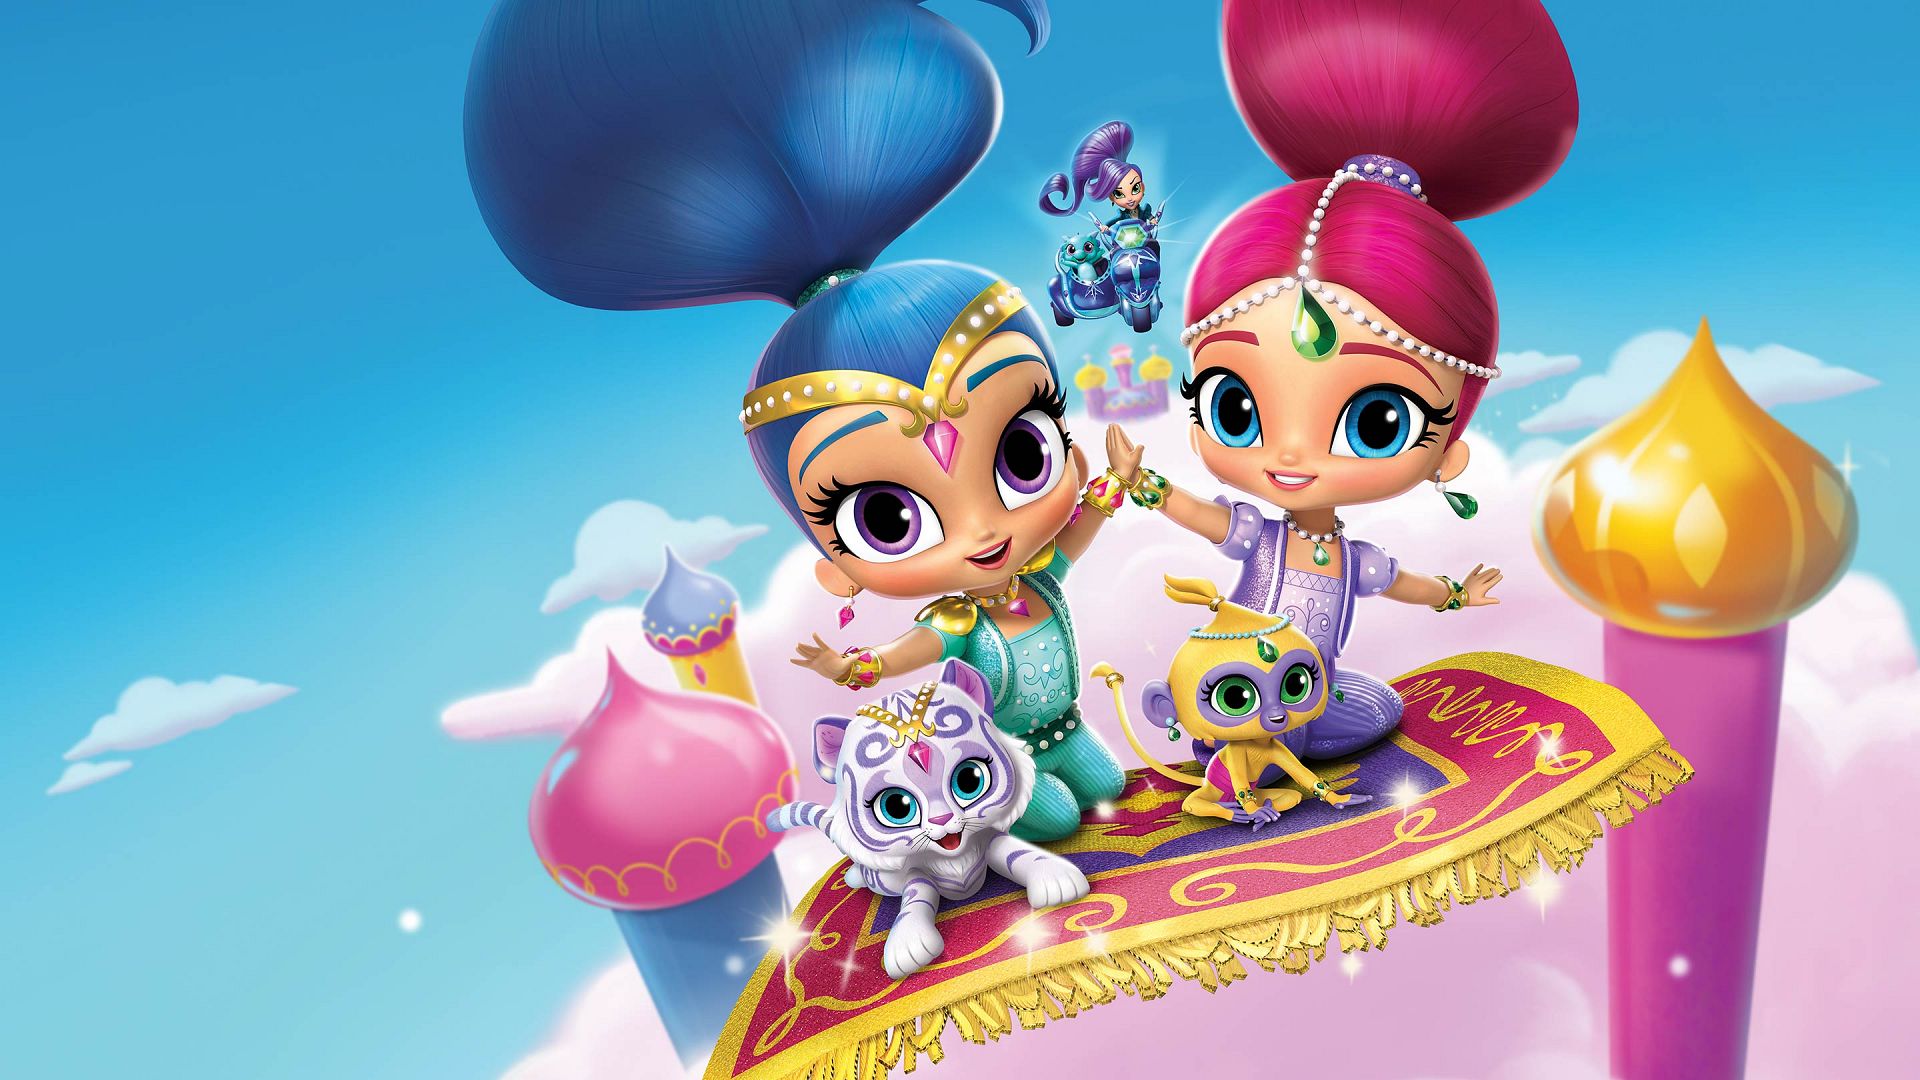 Shimmer And Shine Wallpapers